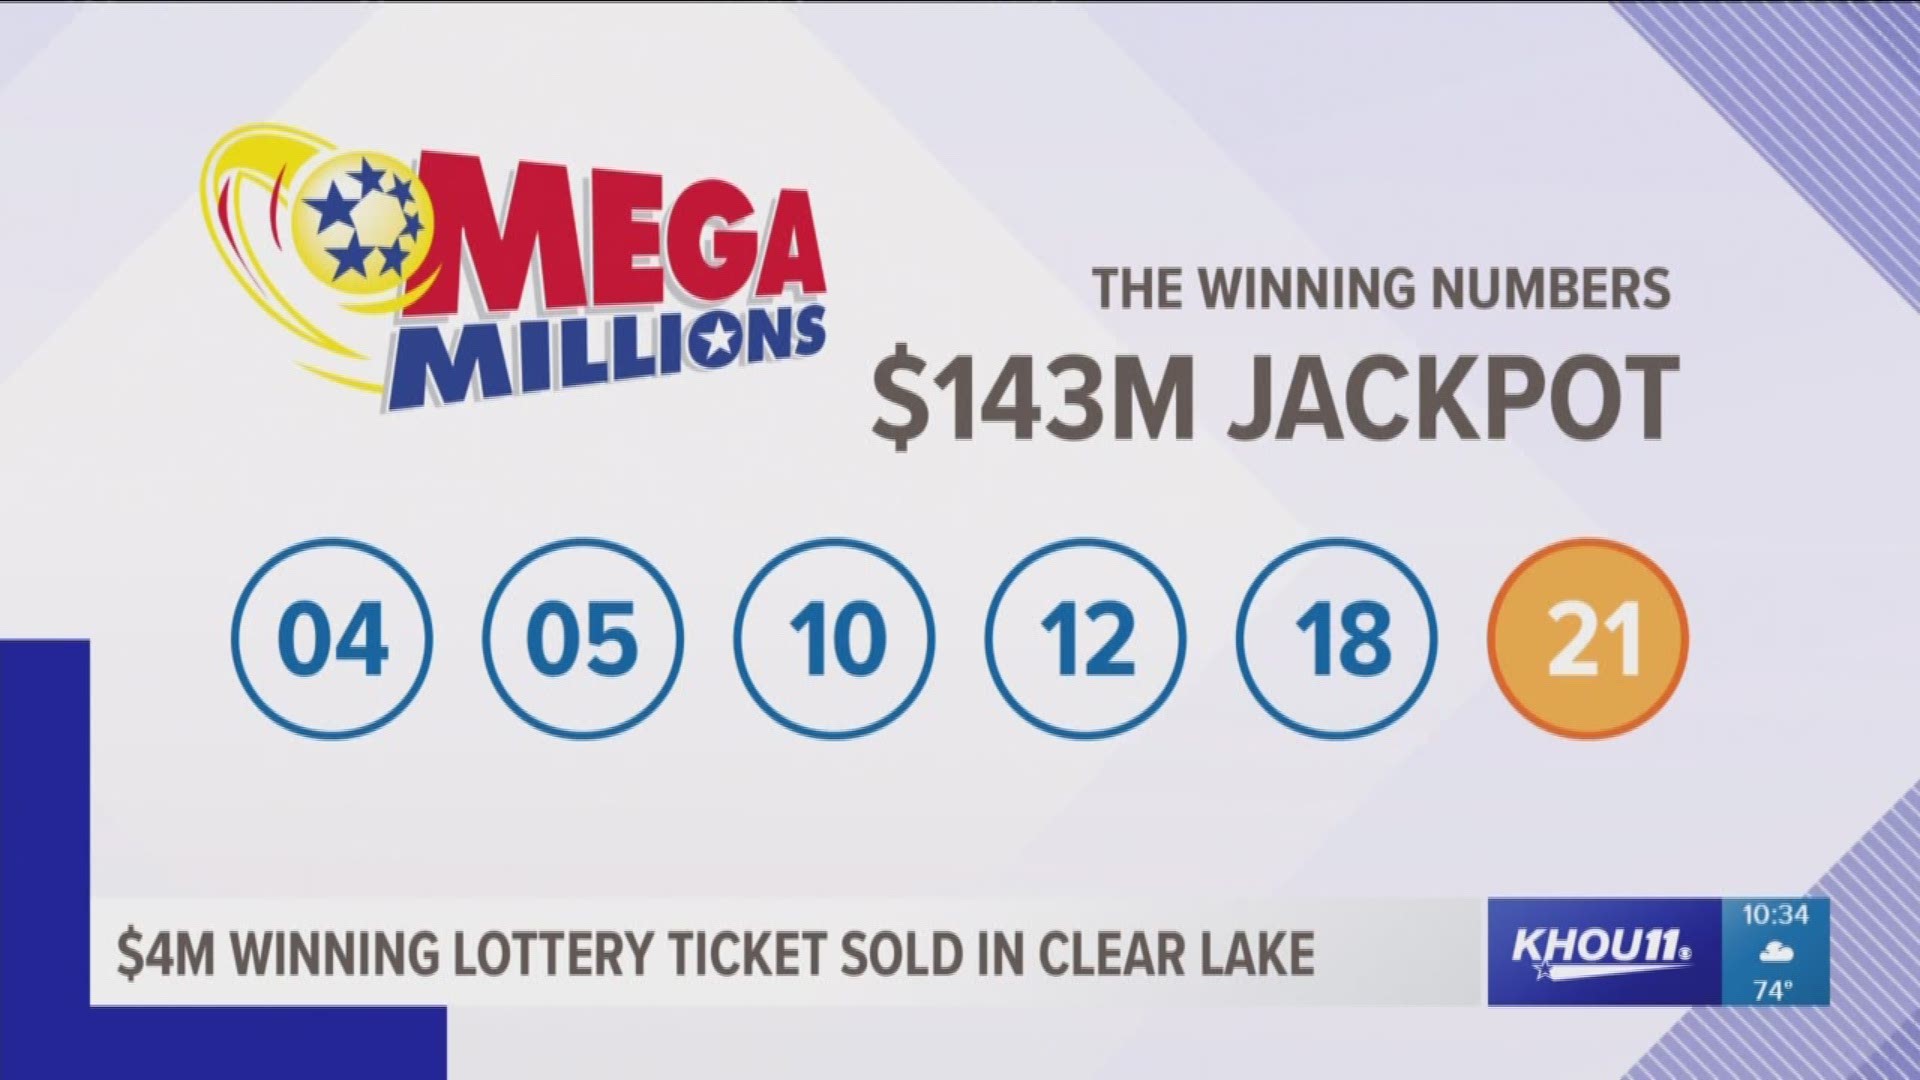 $4 million lottery ticket sold in Clear Lake